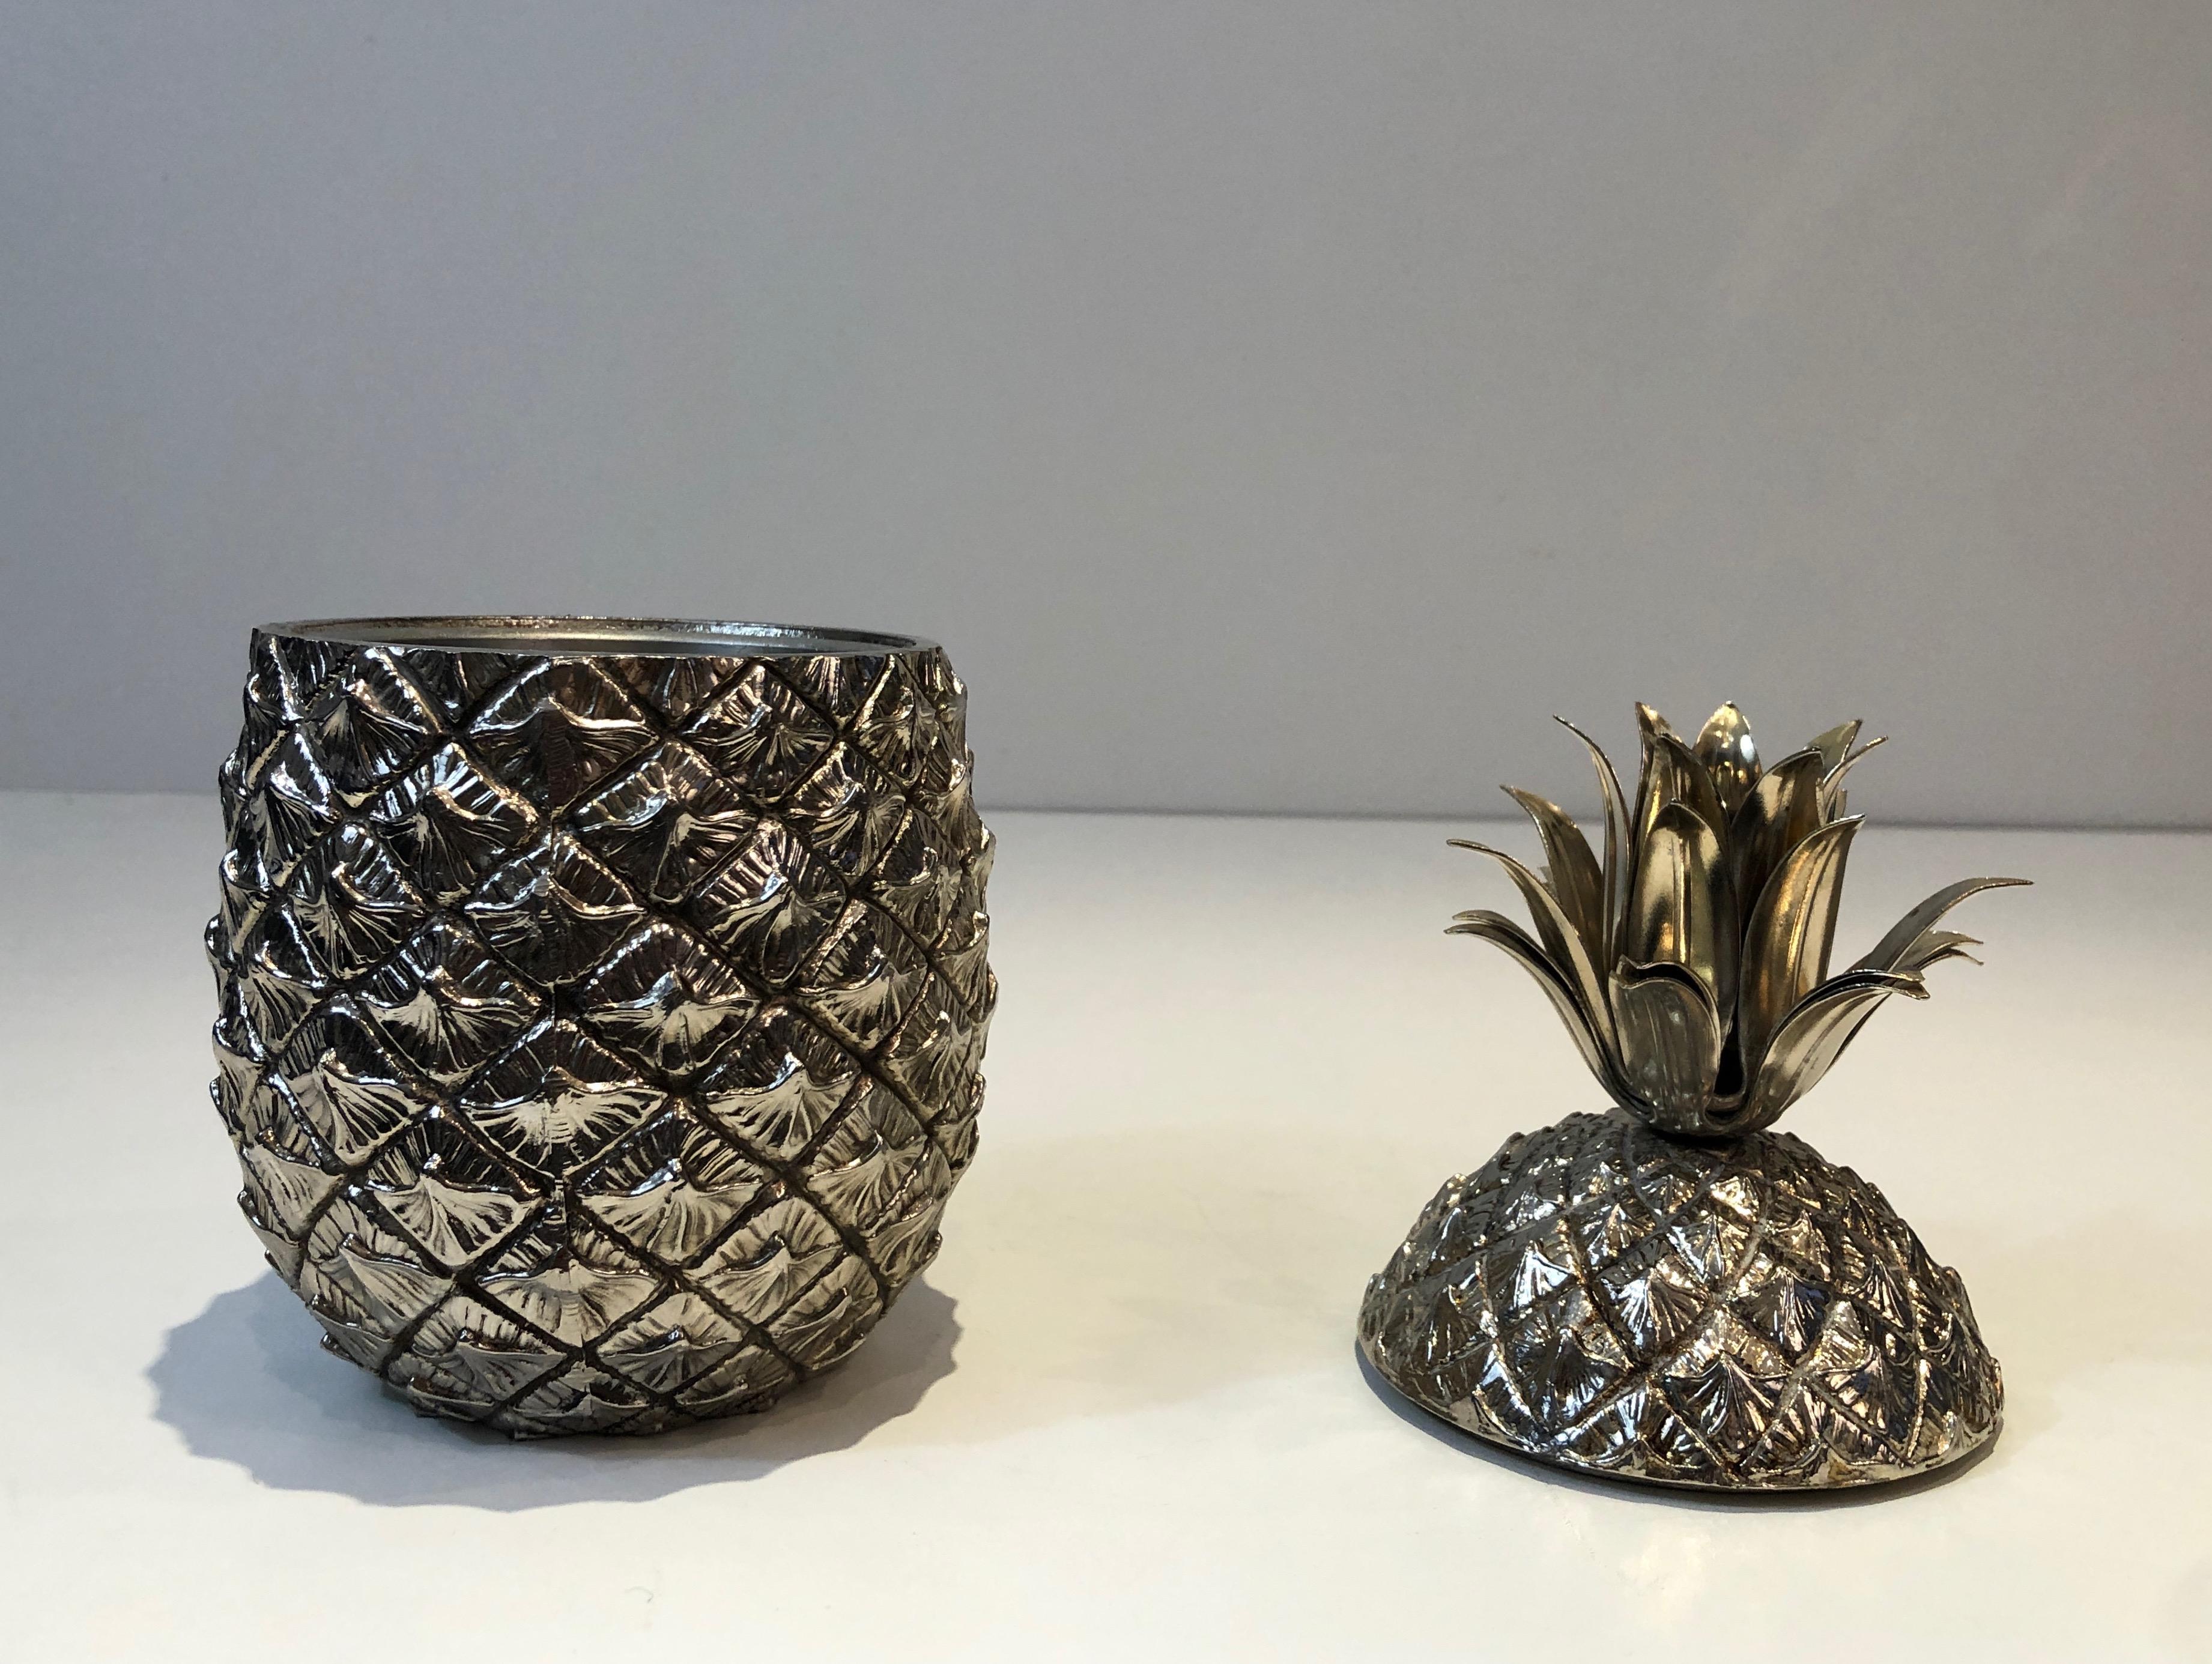 This nice pineapple ice bucket is made of silver plated. This is an Italian work, signed and marked Risi Model Made in Italy underneath, circa 1970.